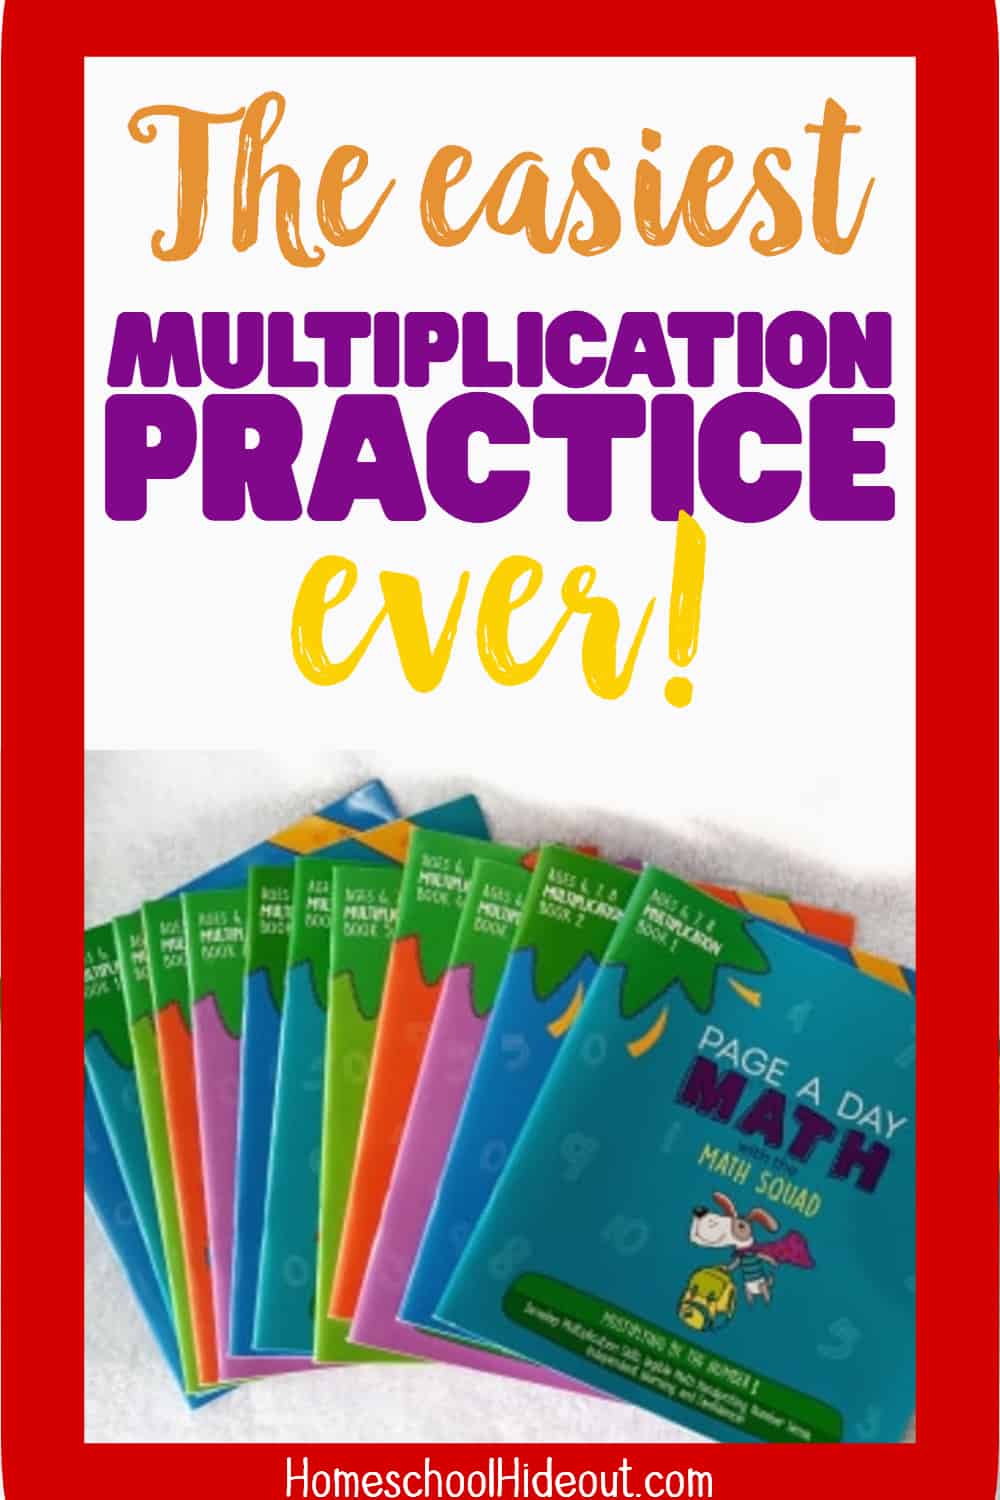 Page a Day Math offers the best multiplication worksheets for us! They're colorful and fun. The kids love them and I love how simple they are!